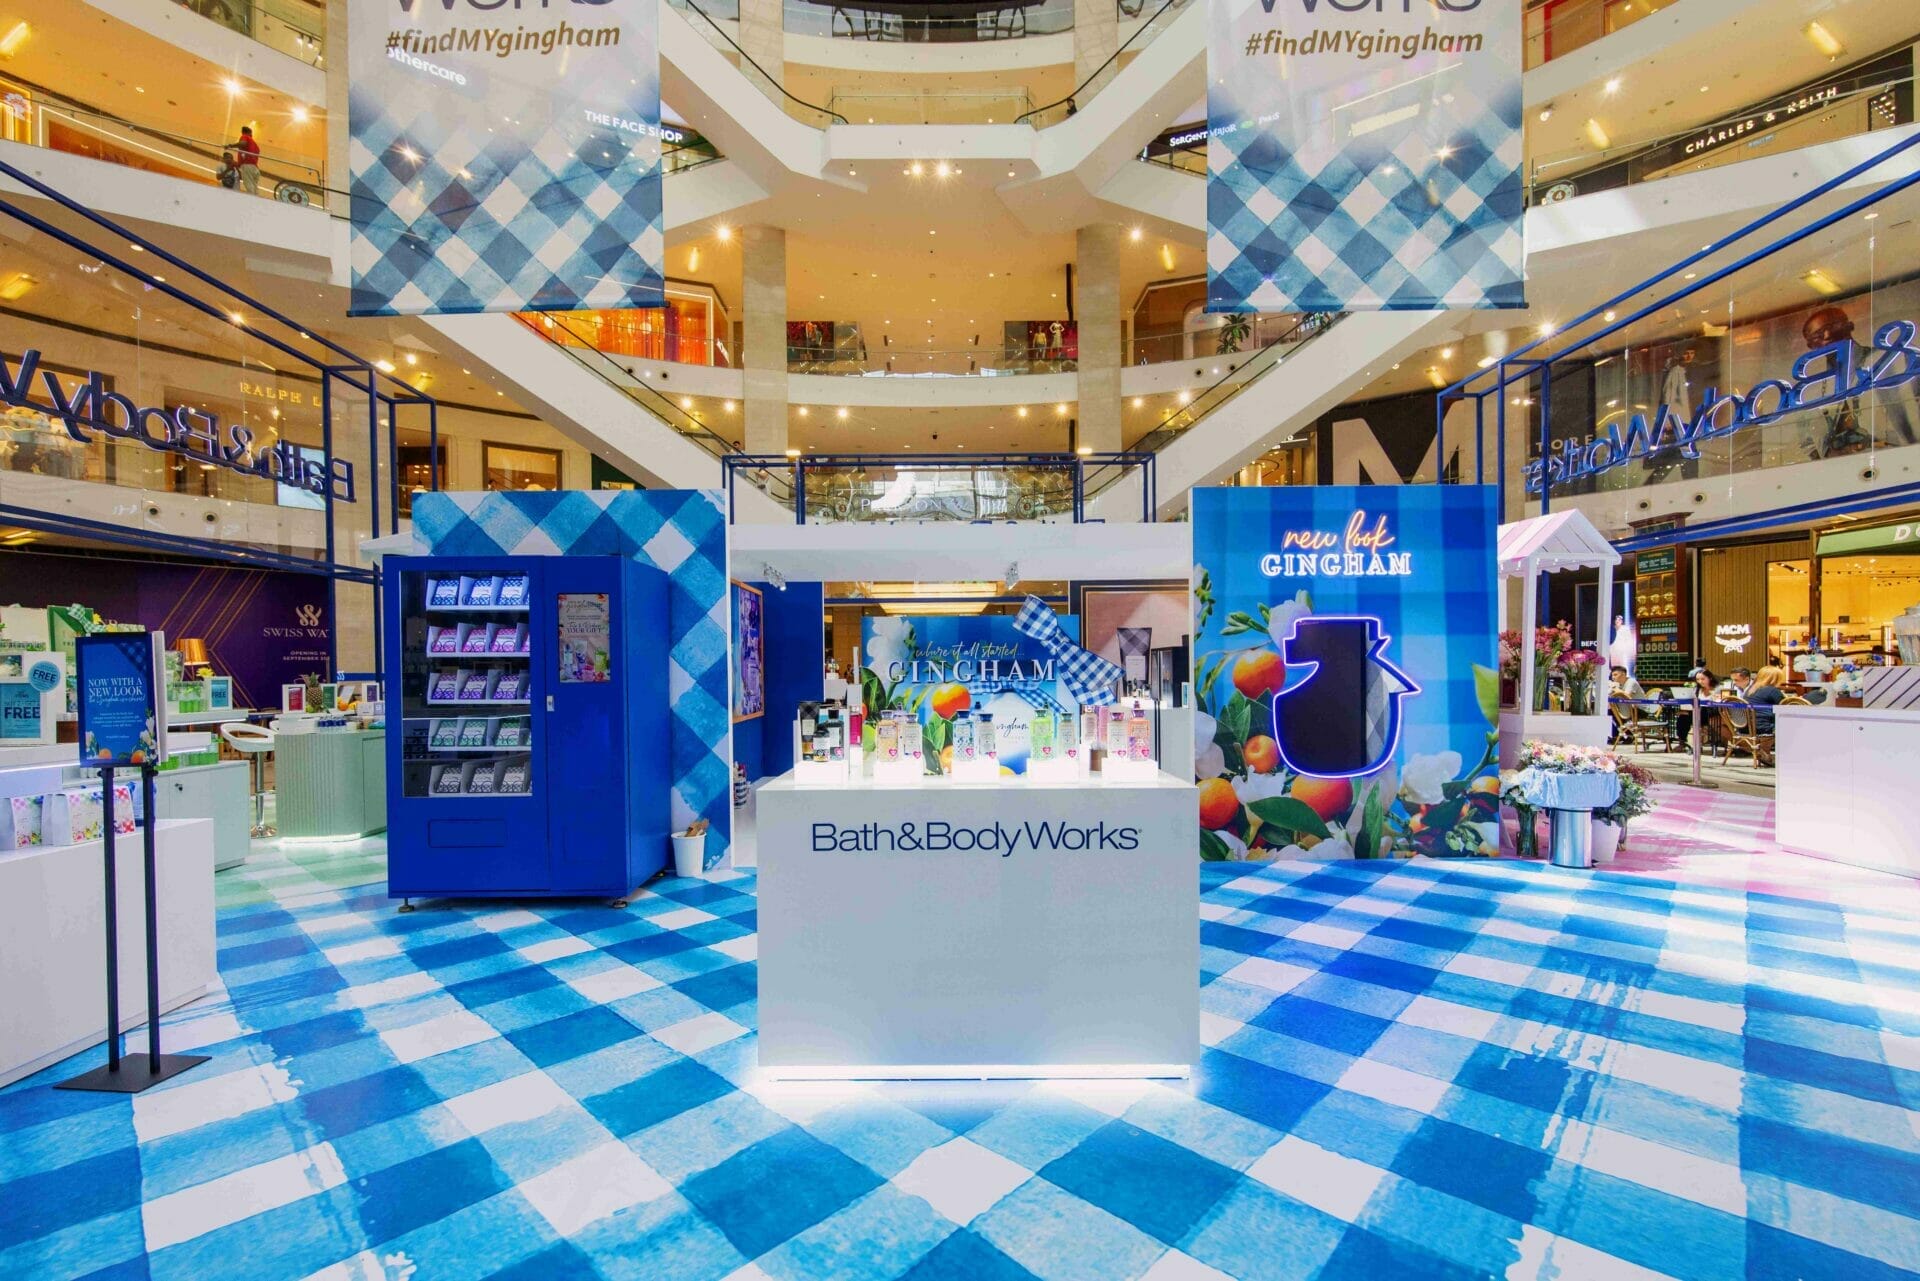 Bath and Body Works celebrate all things Gingham